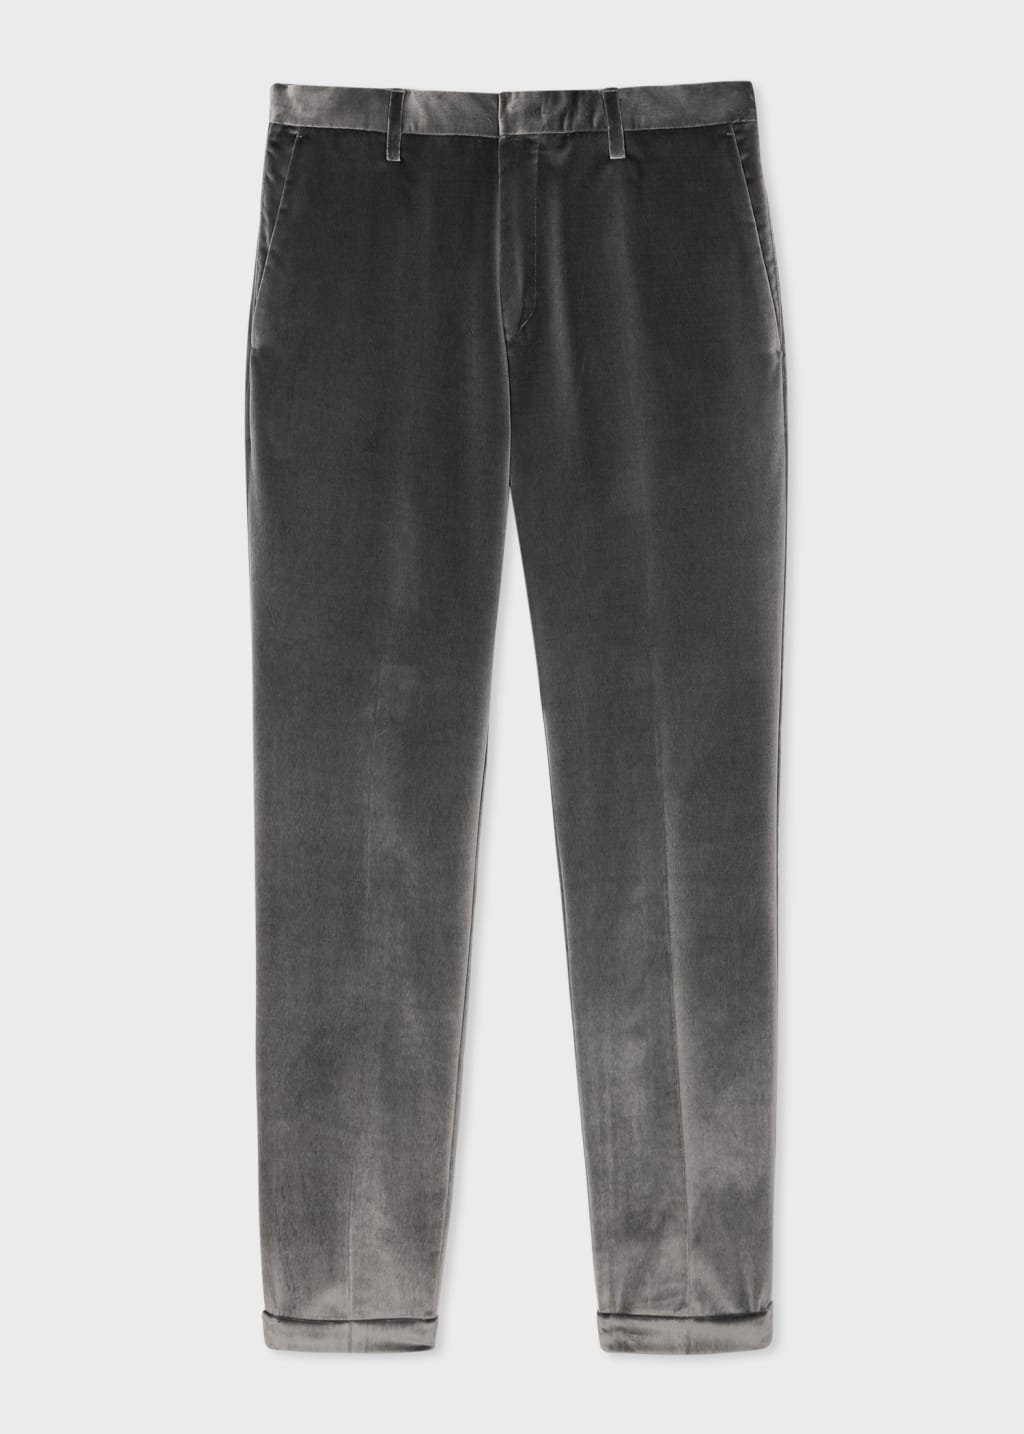 Front View - Slim-Fit Steel Grey Velvet Trousers Paul Smith